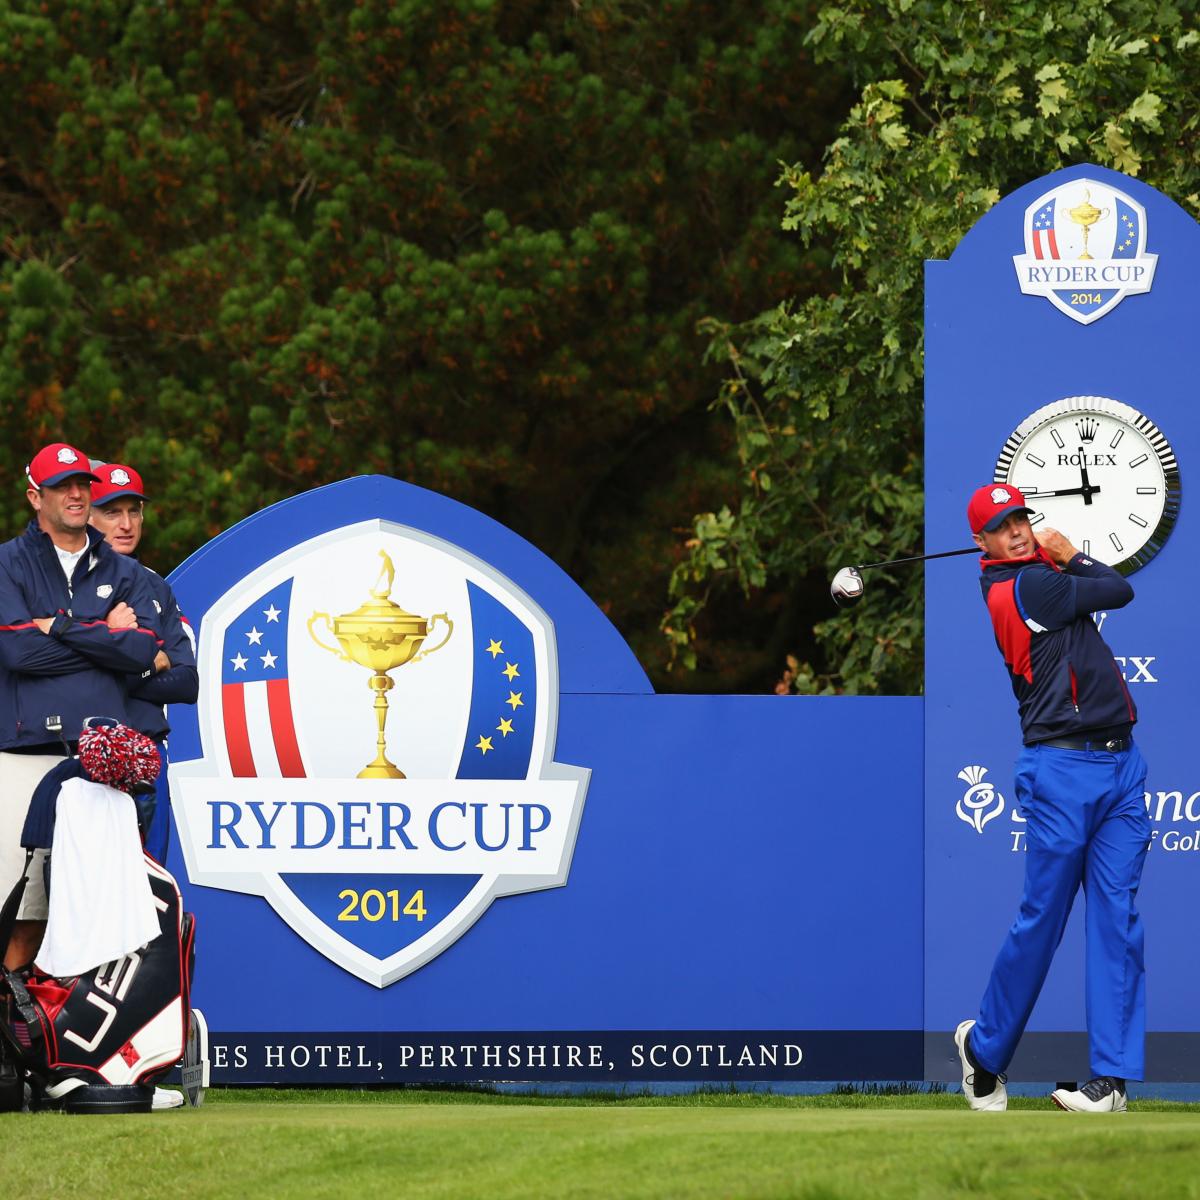 Ryder Cup 2014 Live Updates for Day 1 Scoring and Standings for USA vs